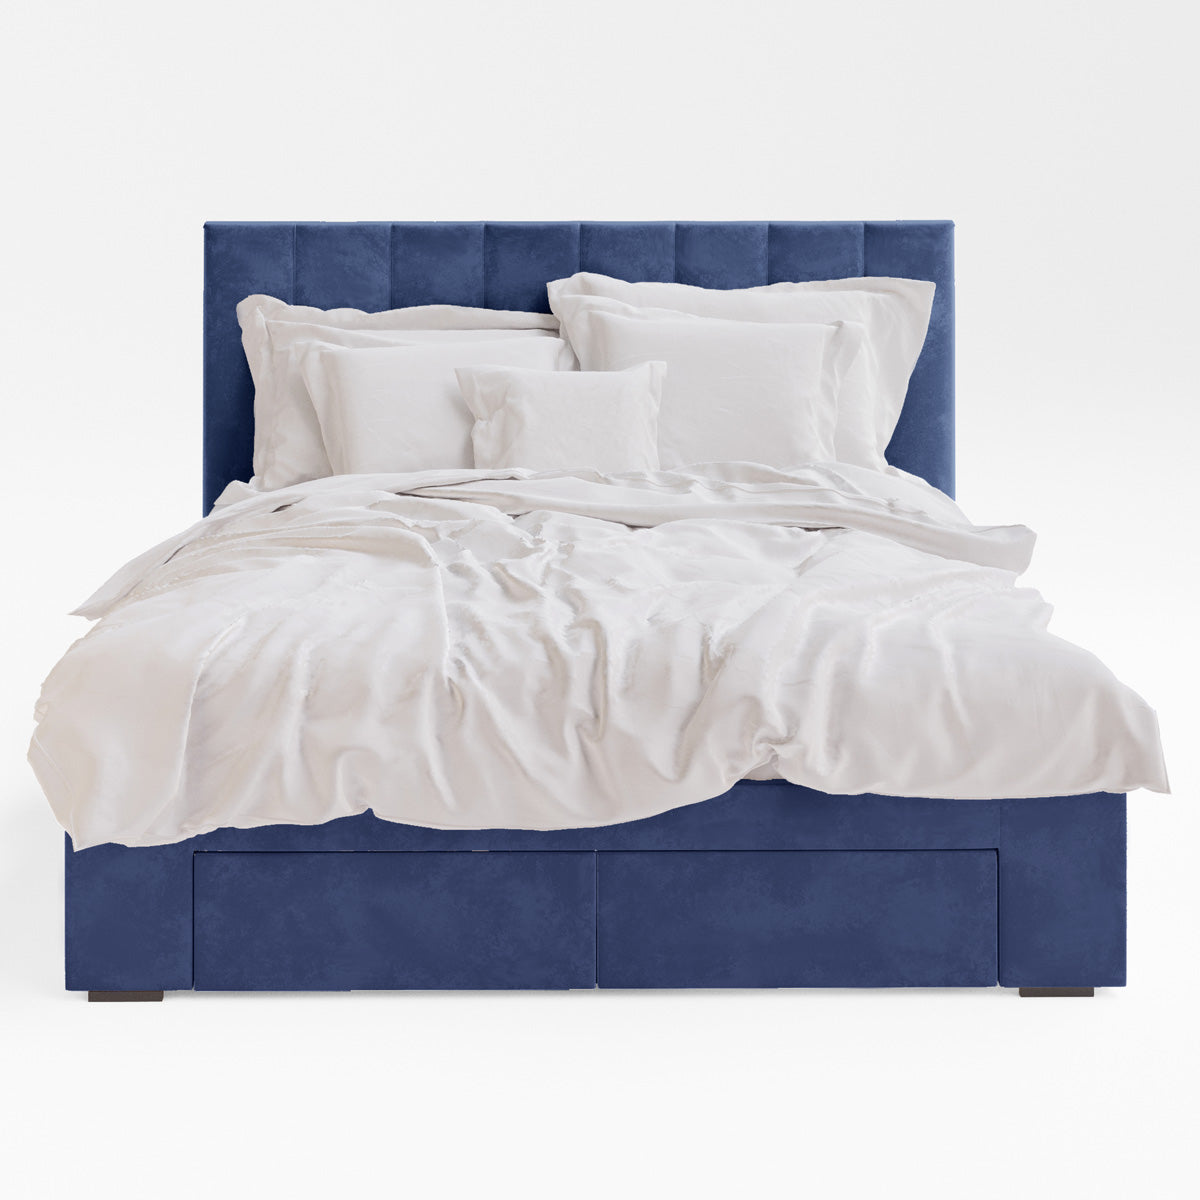 Ormond Bed Frame with Four Extra Large Drawers (Navy Blue Velvet)